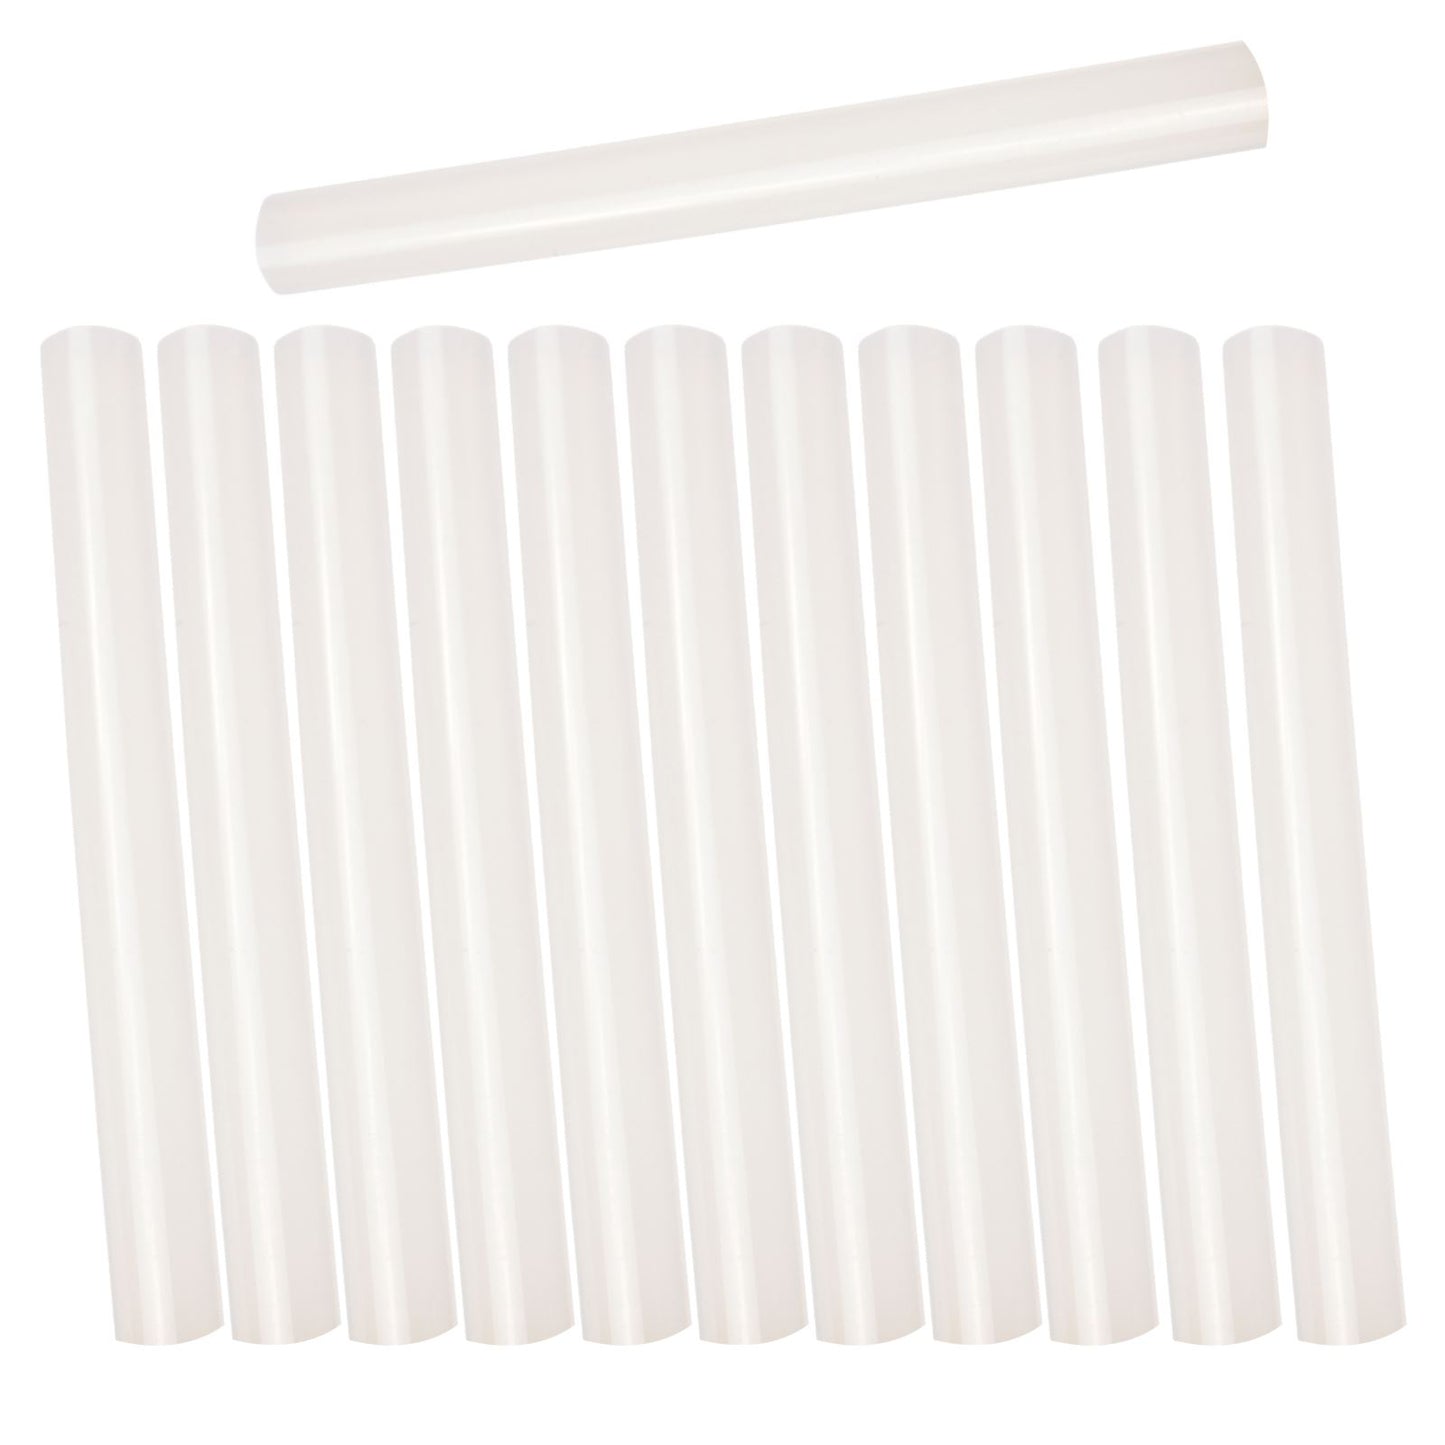 12-Pack Of 100mm X 11mm Hot Glue Sticks For Use With A Hot Melt Pistol Grip Trigger For Arts Crafts And Diy Projects